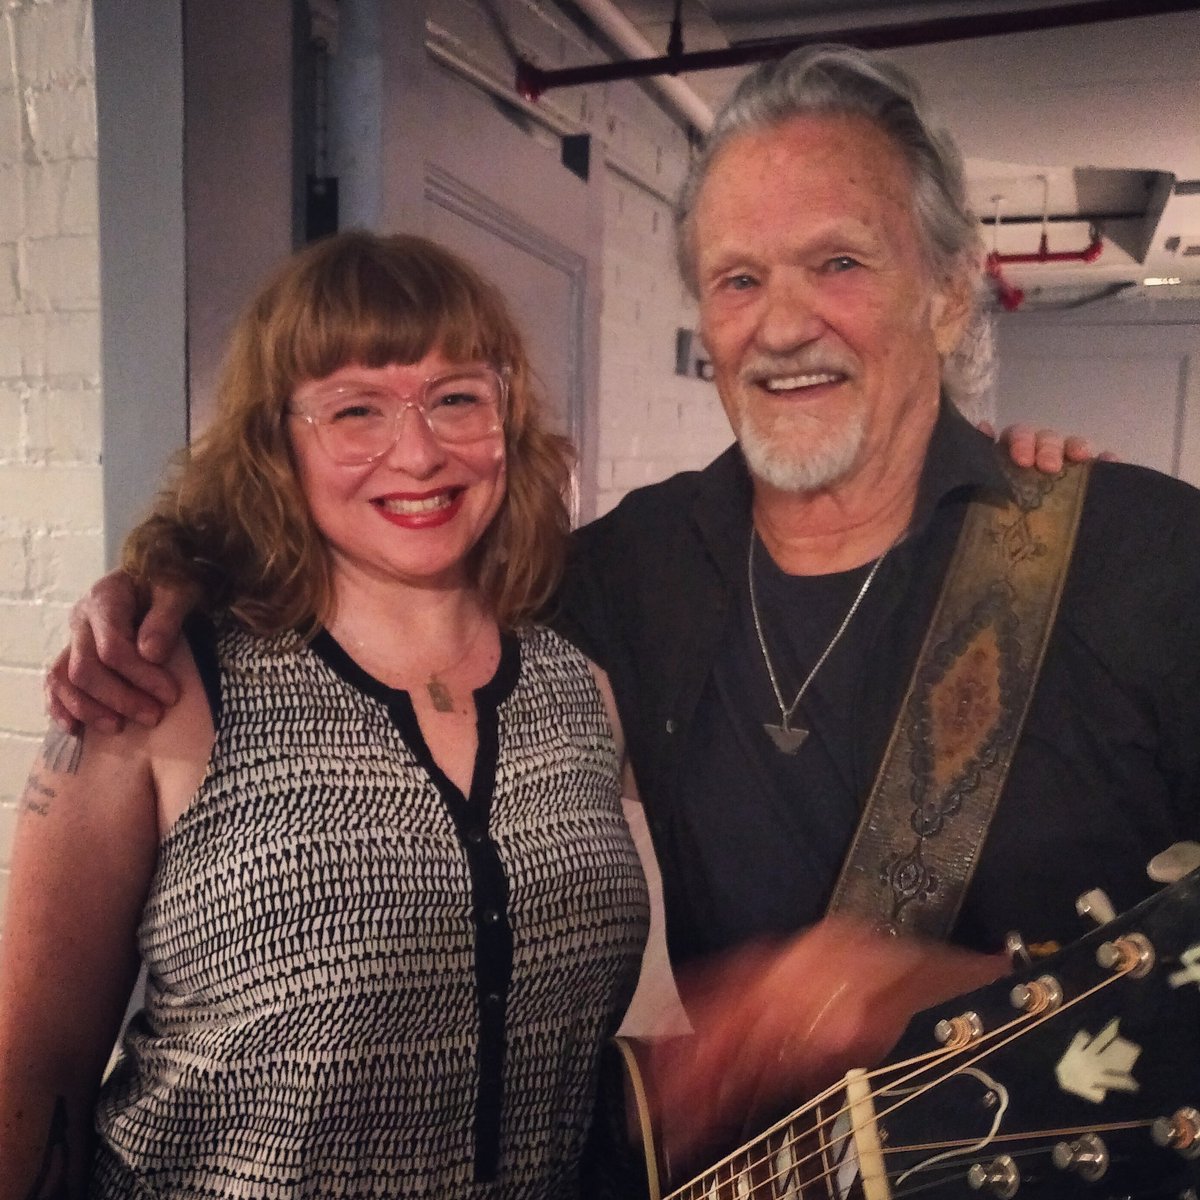 Three months ago I decided to tell Twitter my favourite story of solidarity: Kris Kristofferson standing with Sinead O'Connor while the world was against her. That's maybe why you are following me! Those tweets found their way to Kris, and tonight I got to thank him in person. <3